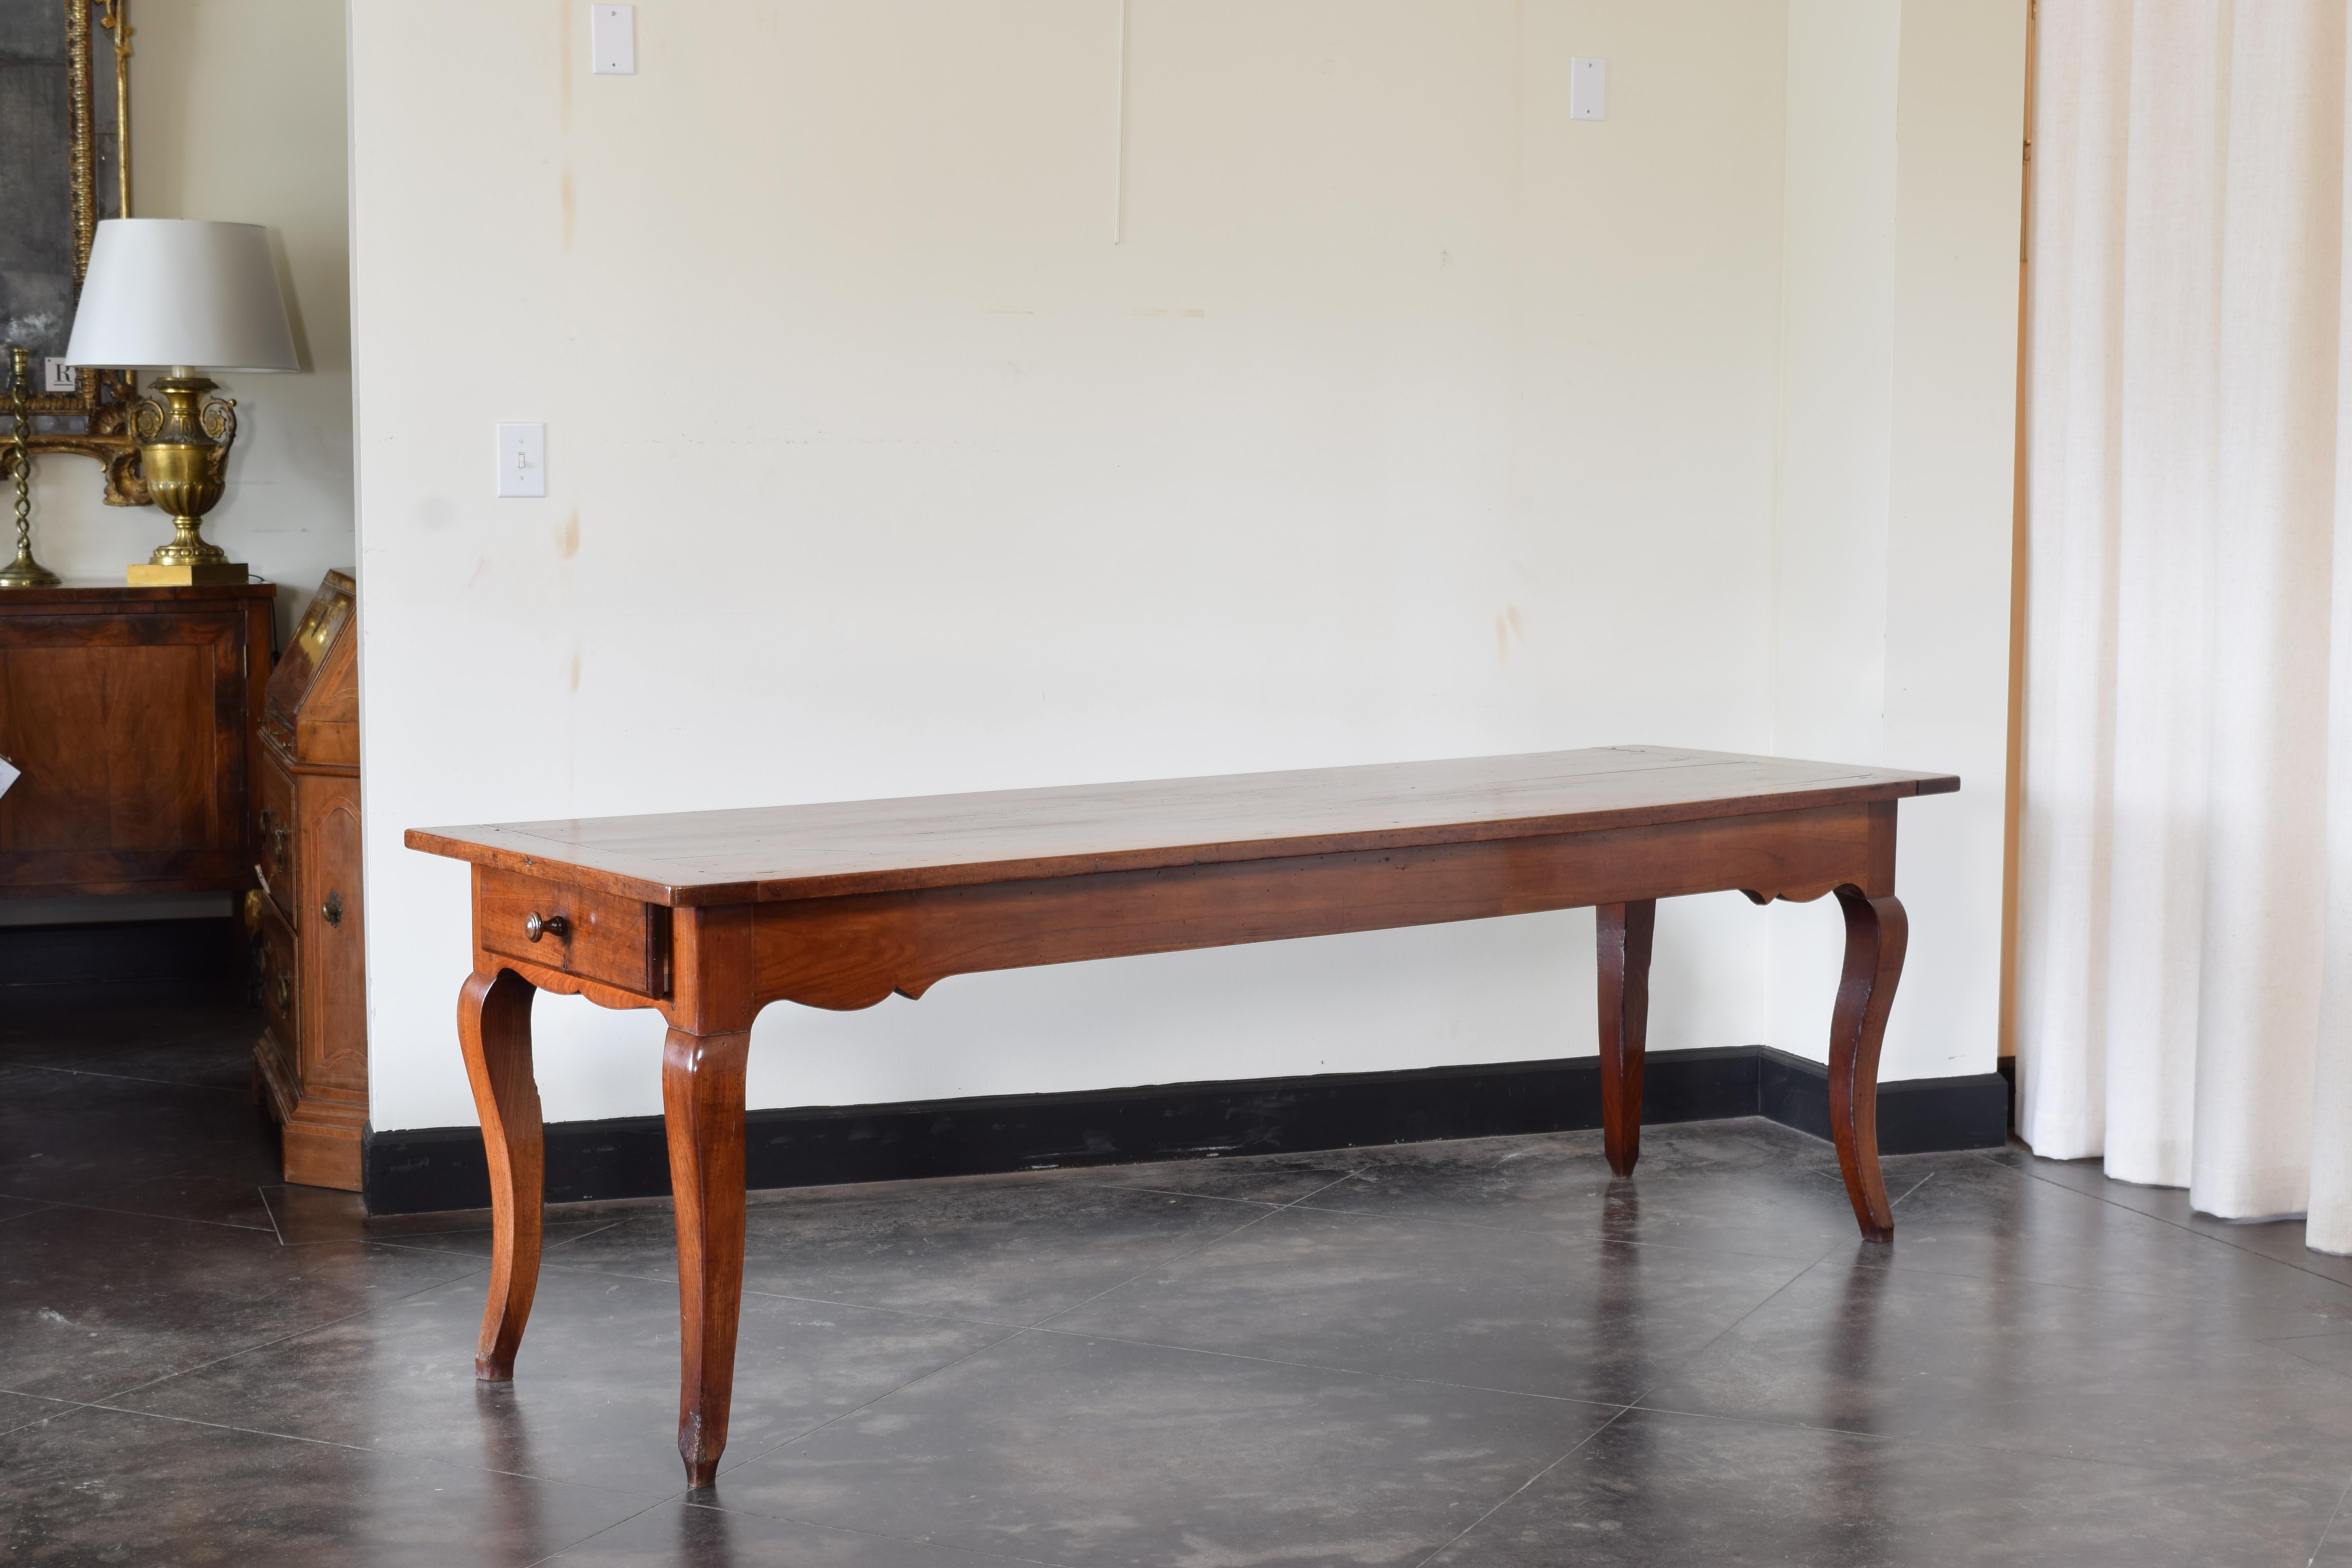 Having a rectangular top with breadboard ends and rounded corners atop a conforming frame housing two side drawers, the apron interestingly shaped, raised on cabriole legs